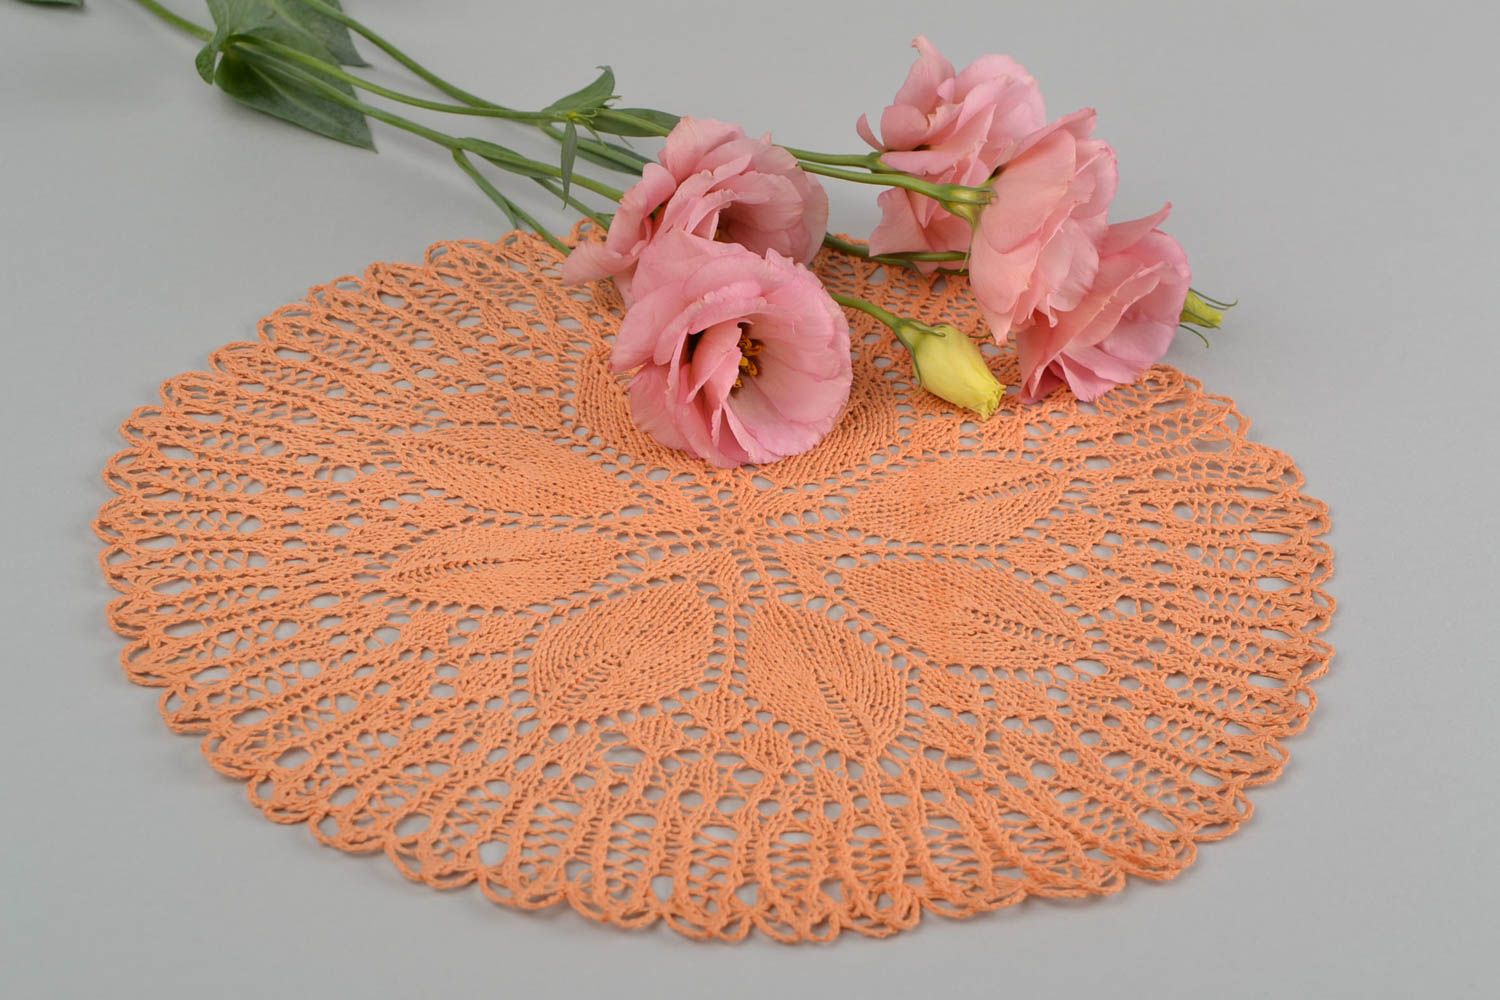 Handmade knitted tablecloth lace openwork napkin vintage style interior decor photo 1